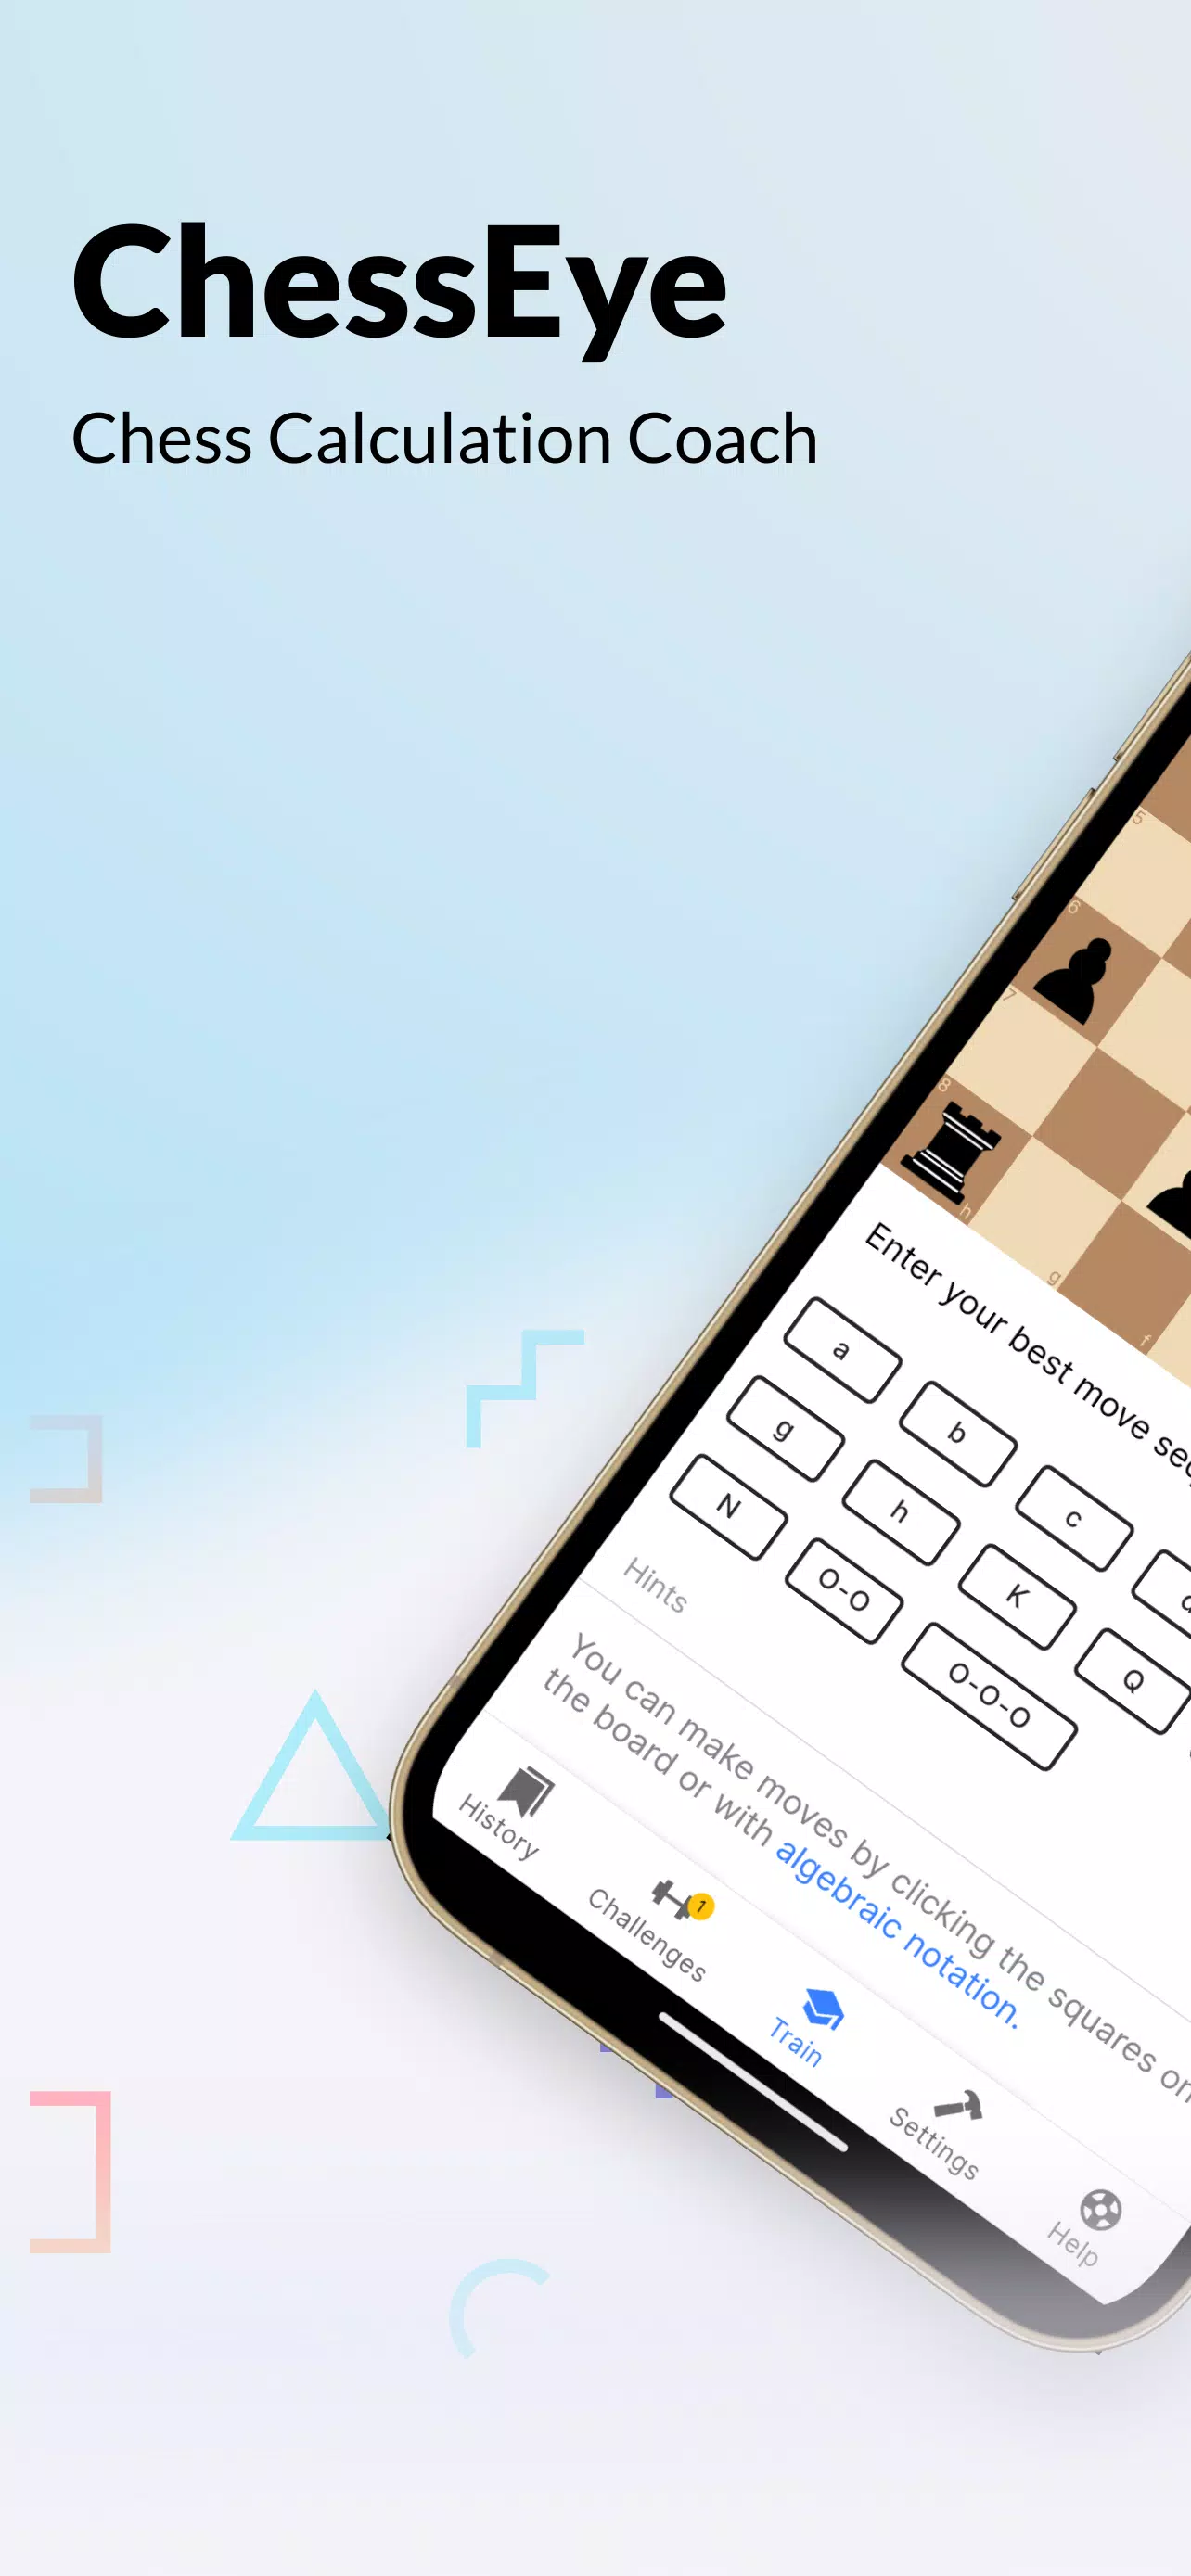 Chessable APK for Android - Download